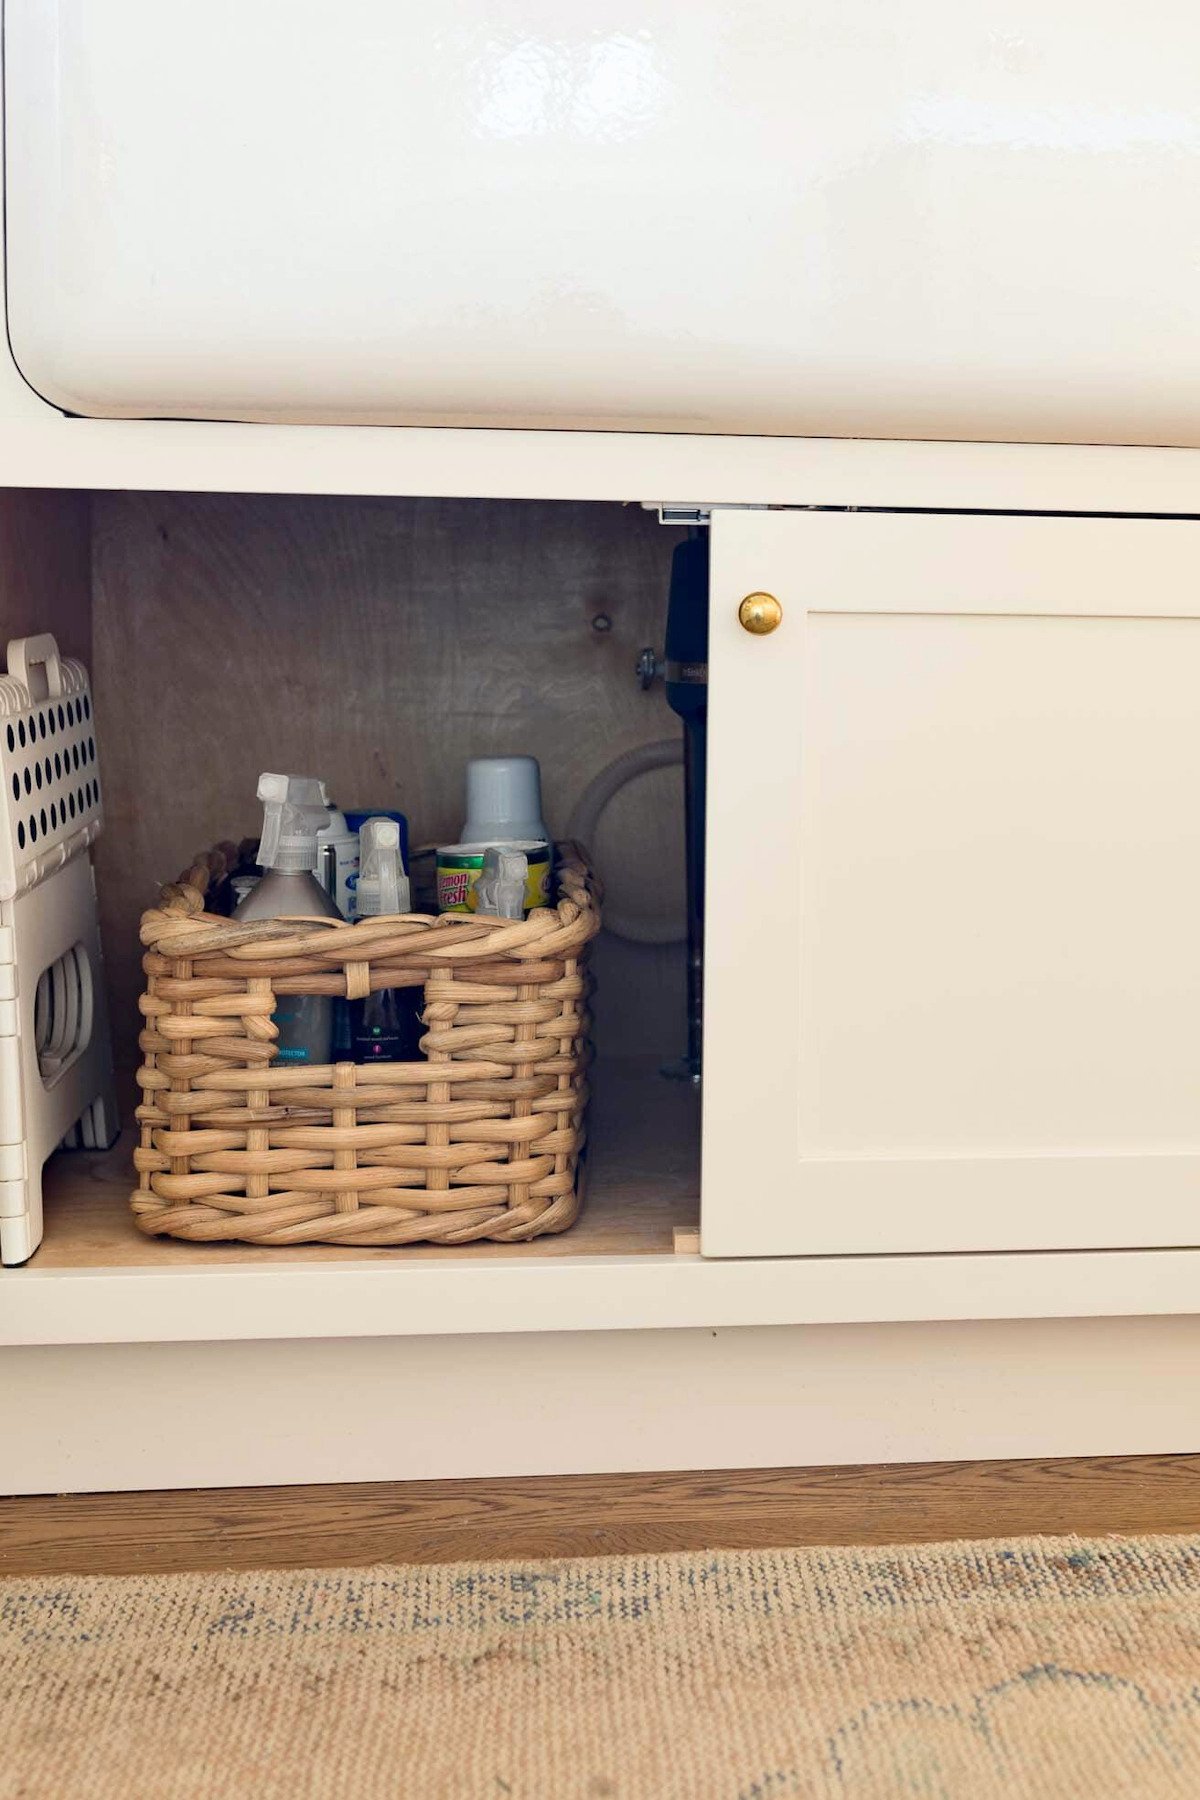 A laundry room with UNDER SINK STORAGE ideas, showcasing a basket beneath the sink.